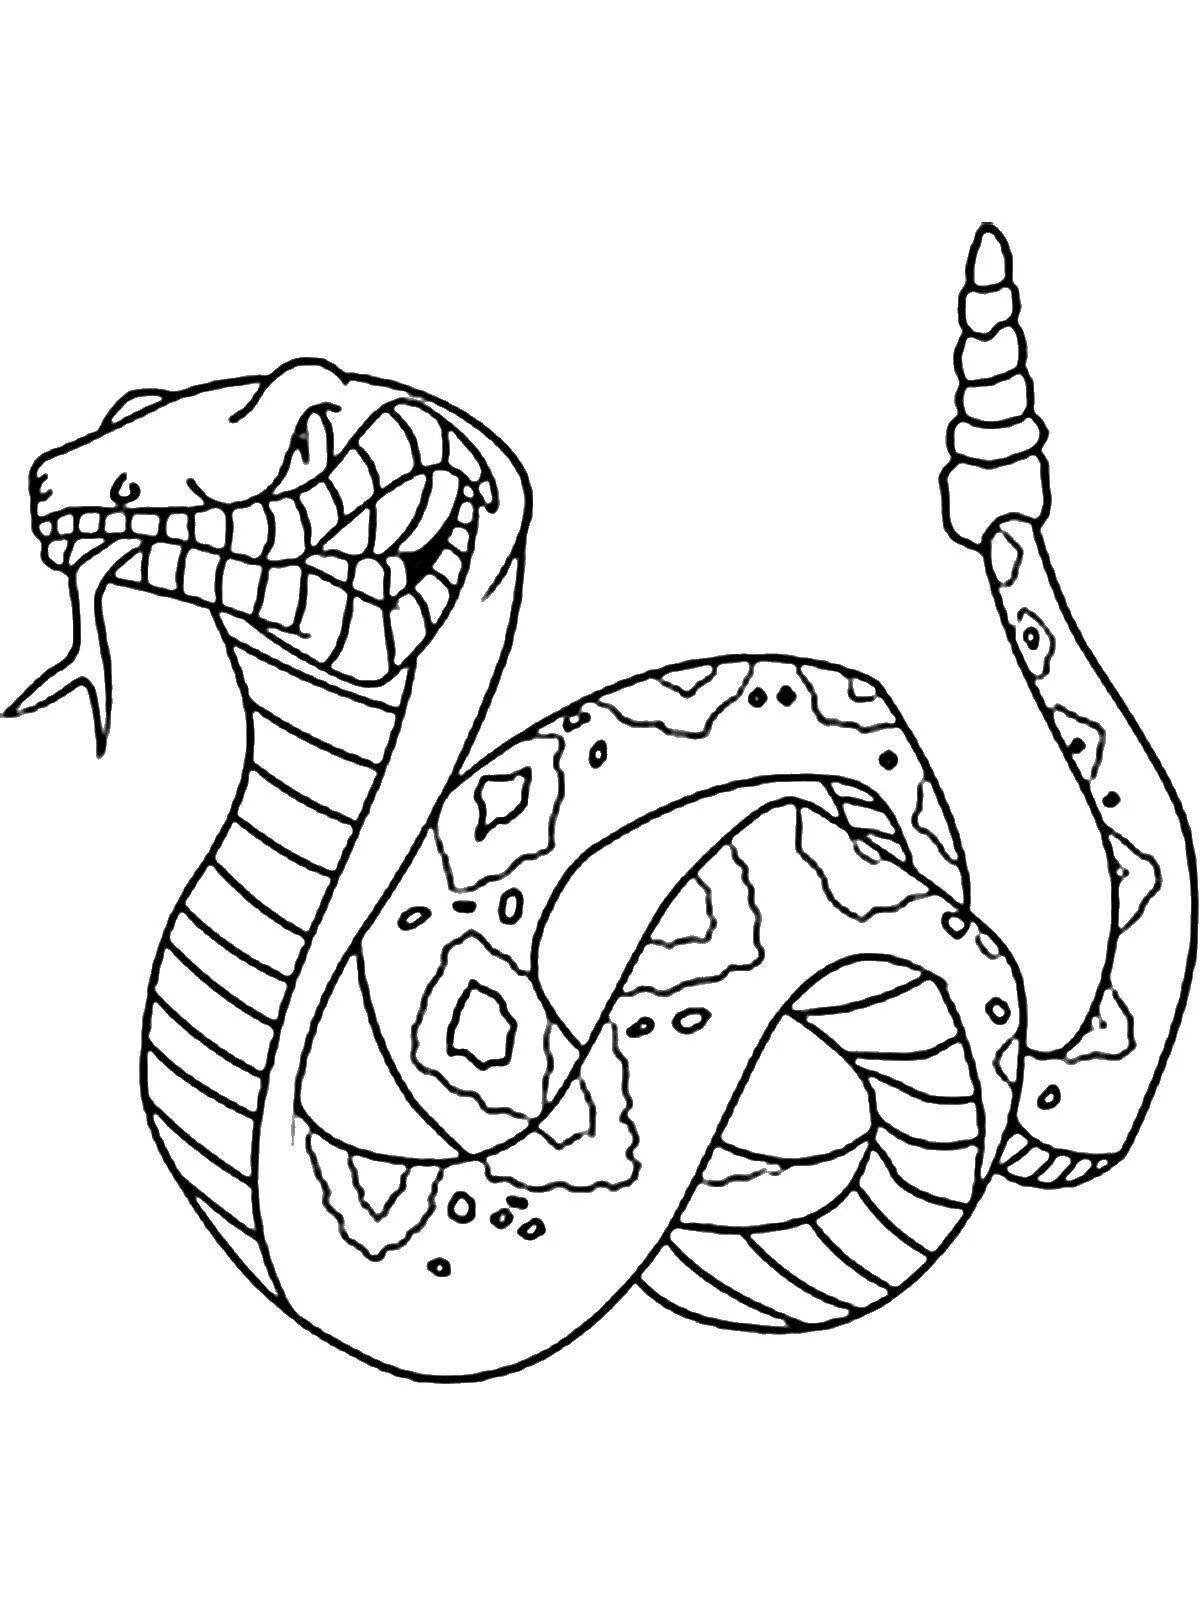 Tempting reptile coloring pages